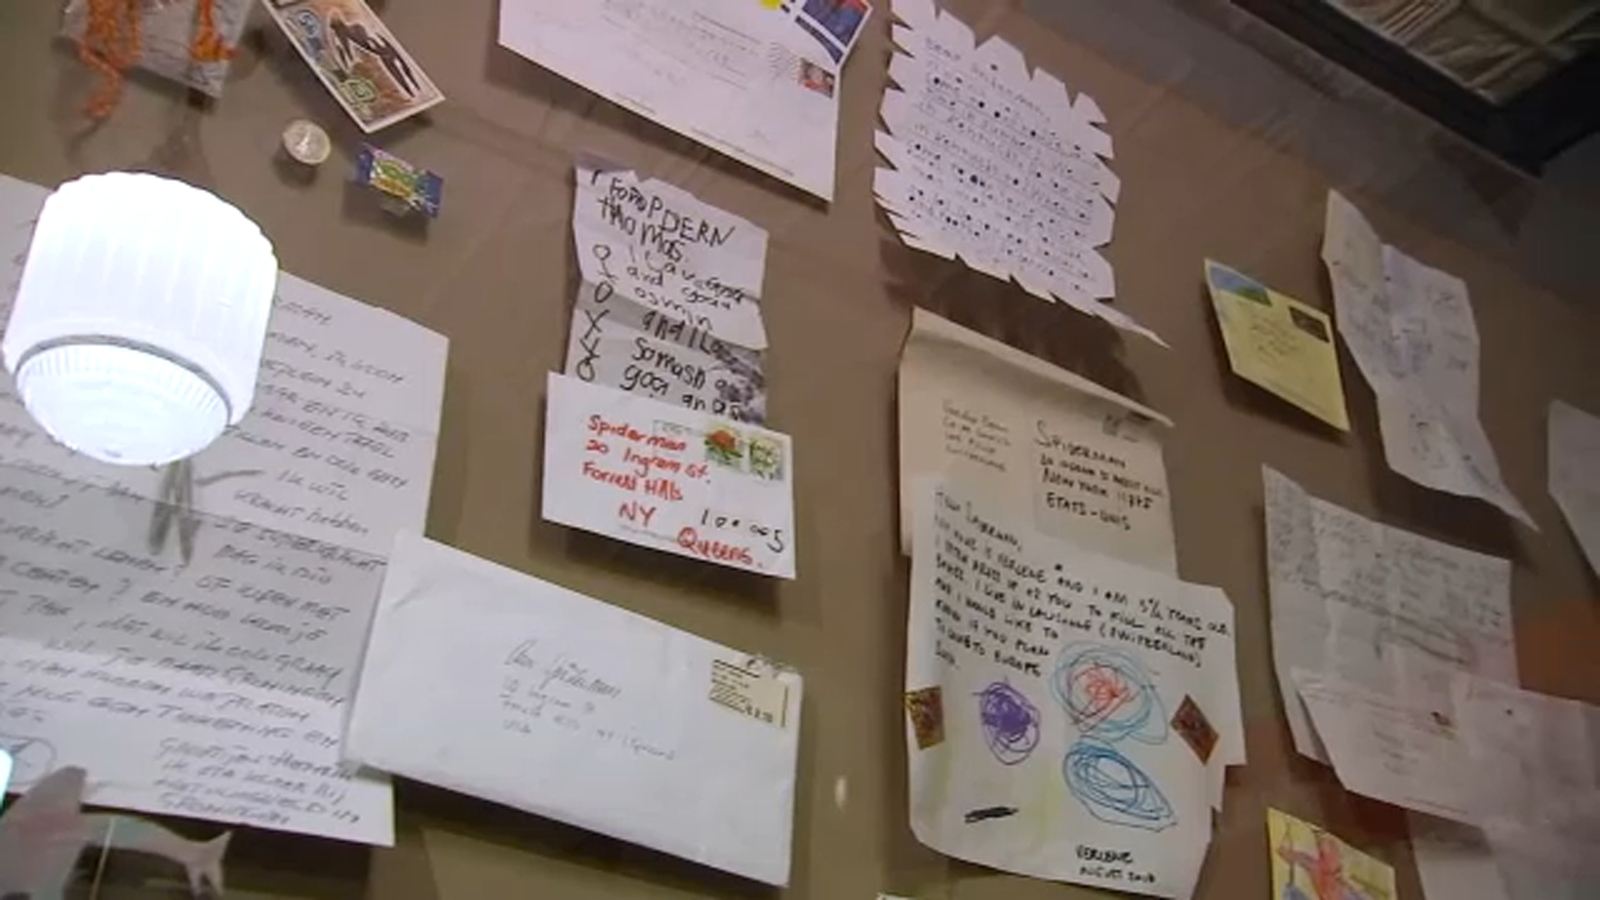 Letters sent to Forest Hills address featured in Spider-Man comic now in NYC museum